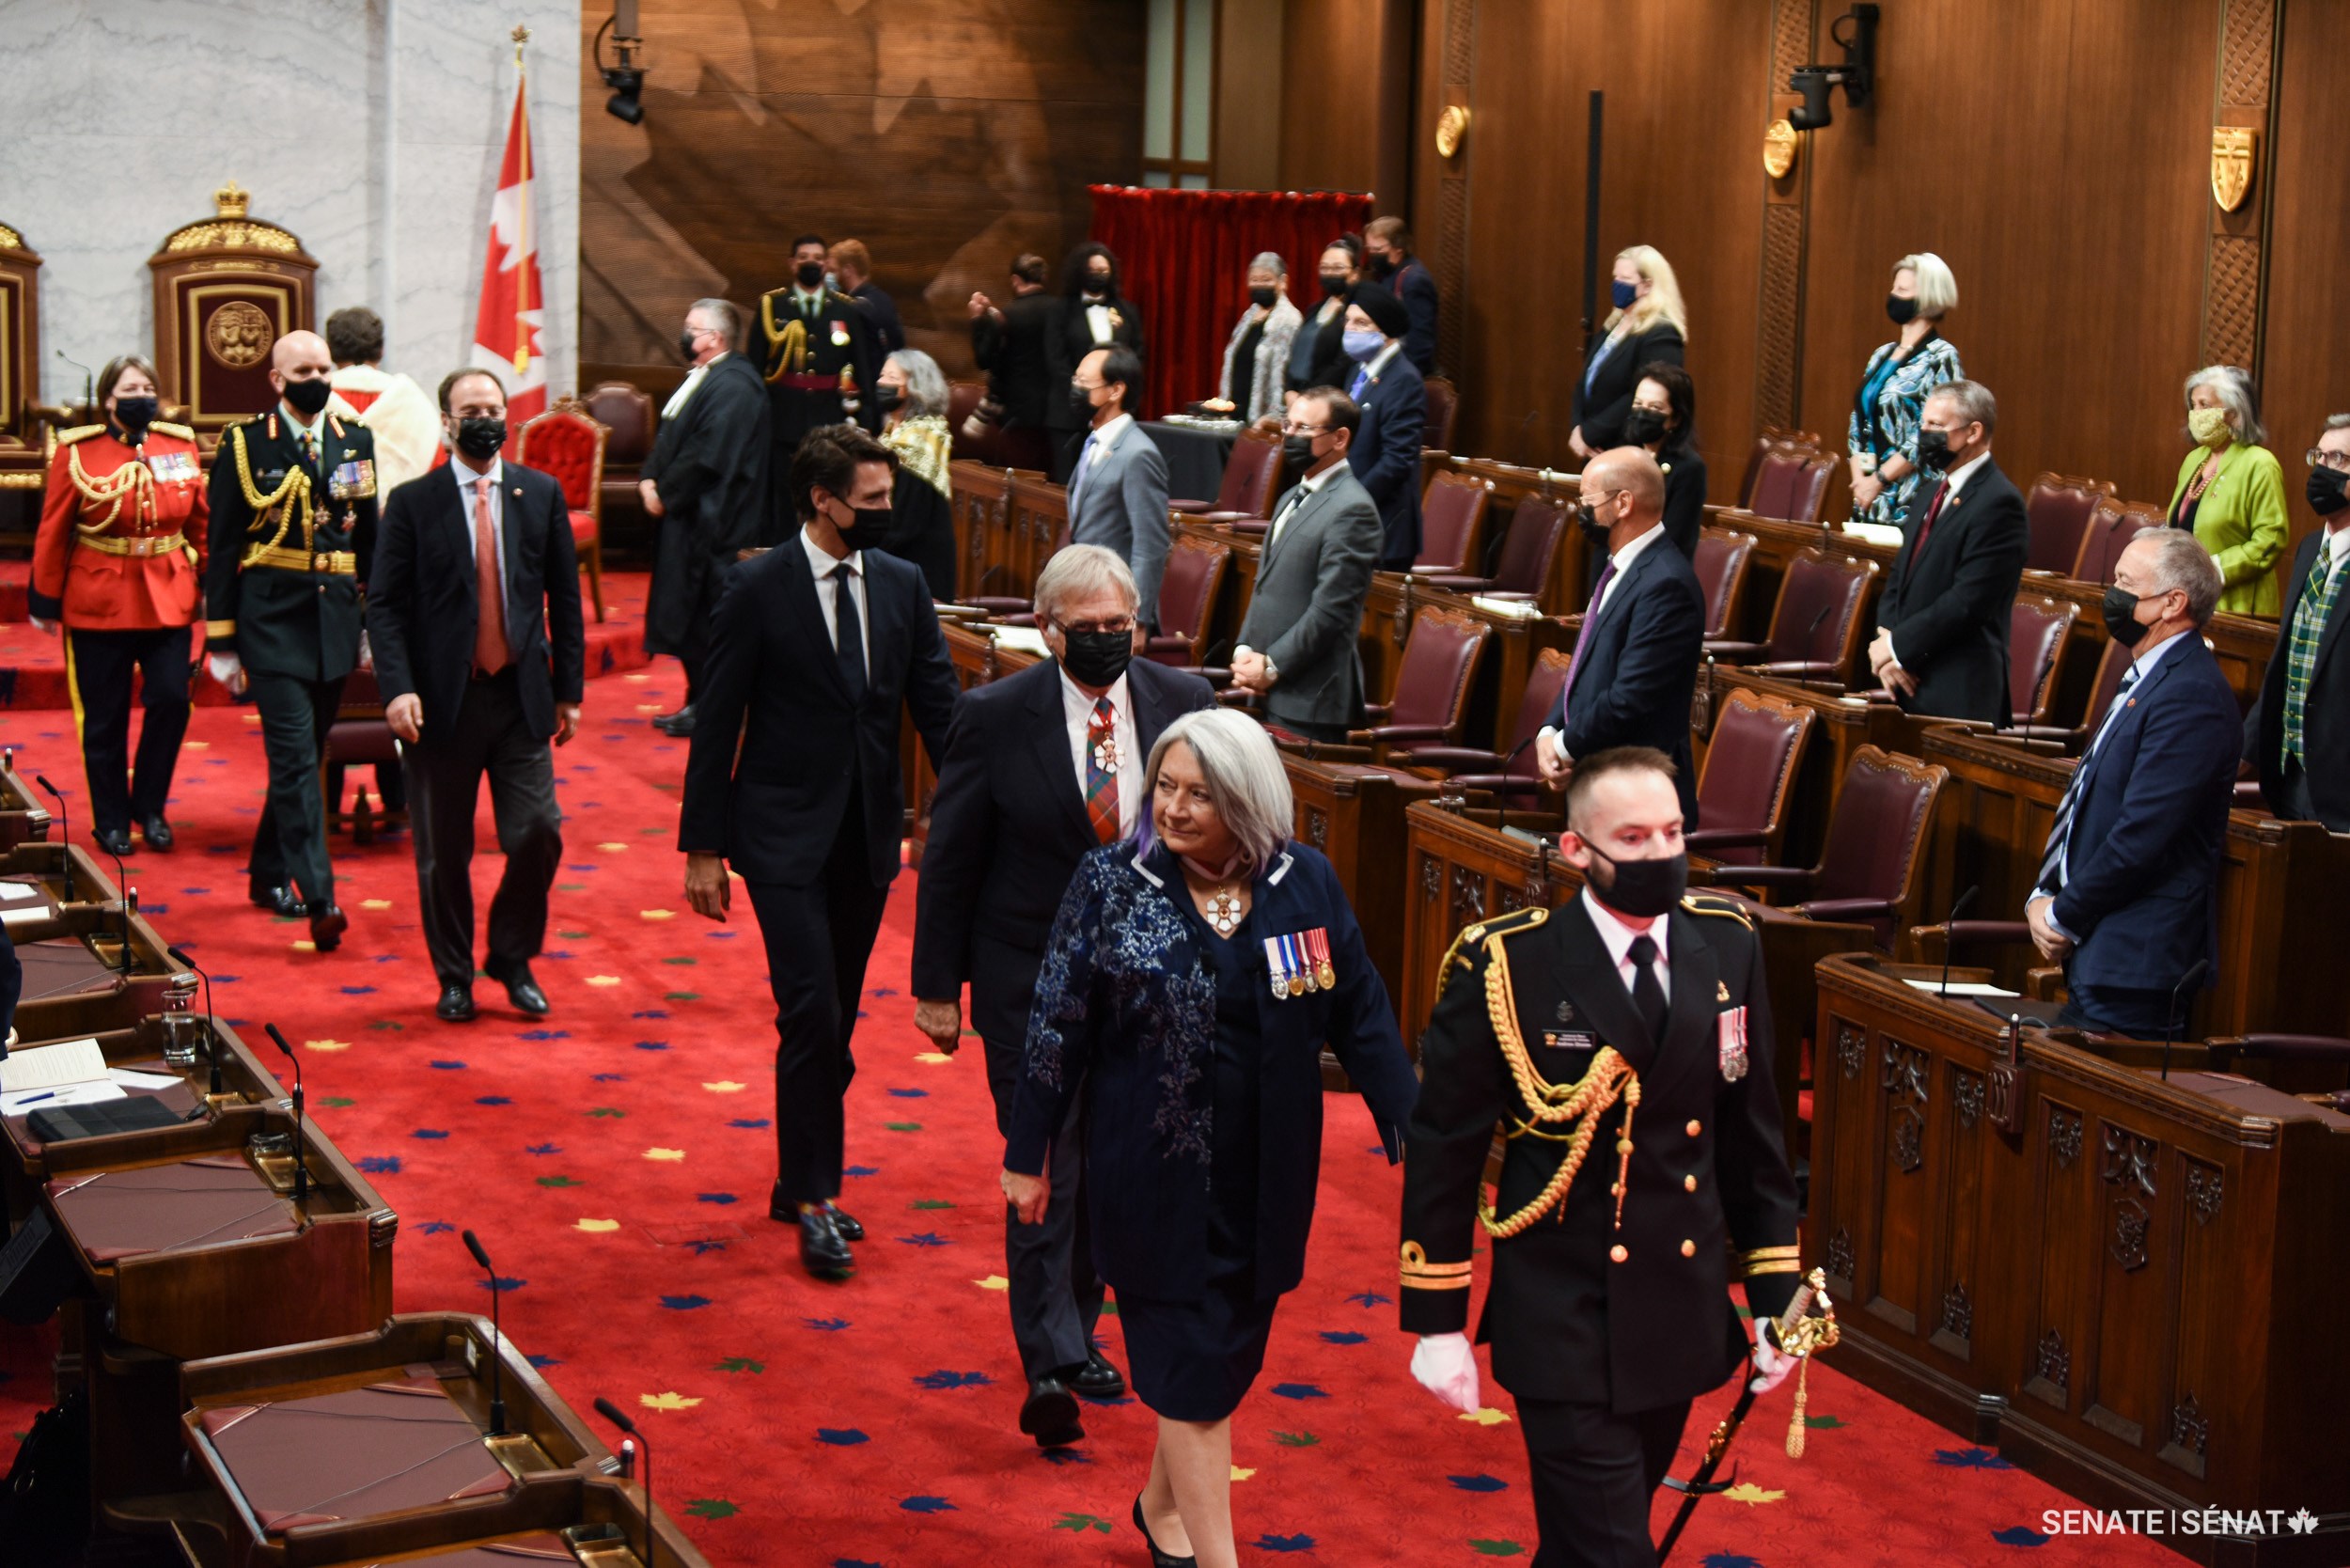 Senators rise in respect as the governor general leaves the Red Chamber.